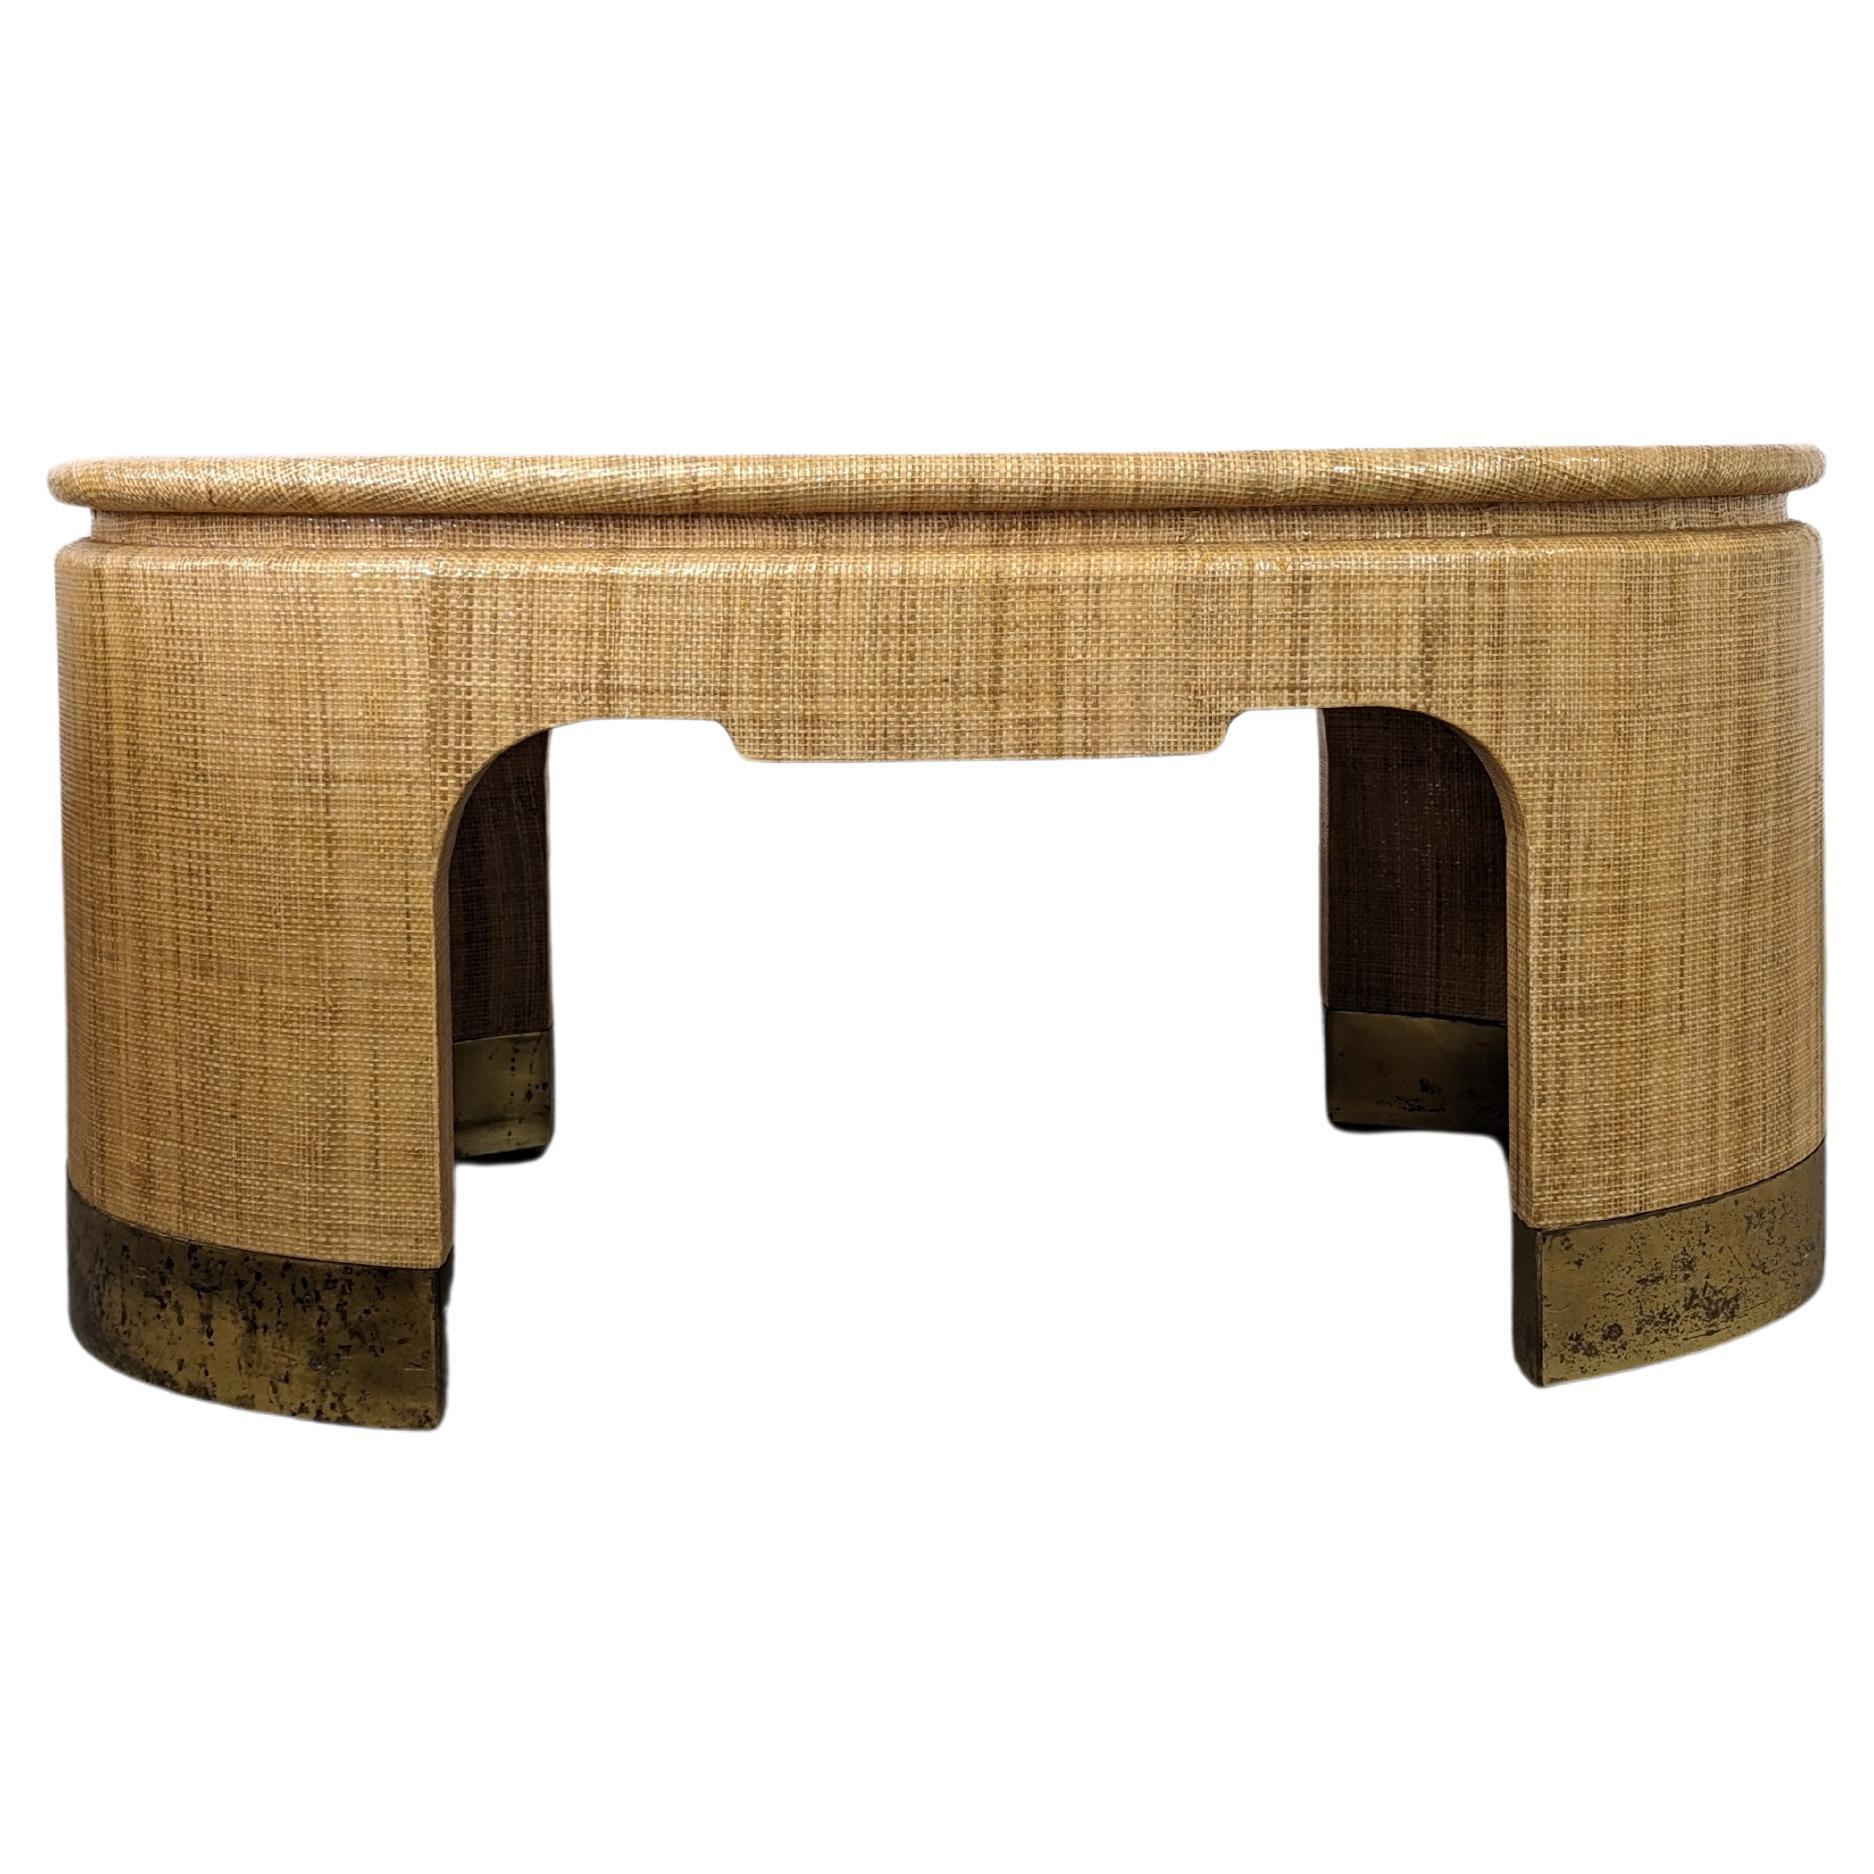 Step into the elegant world of mid-century design with this exquisite Harrison Van Horn Raffia Side or Coffee Table, a genuine vintage treasure from the 1970s that promises to elevate any living space. Wrapped meticulously in a refined grasscloth